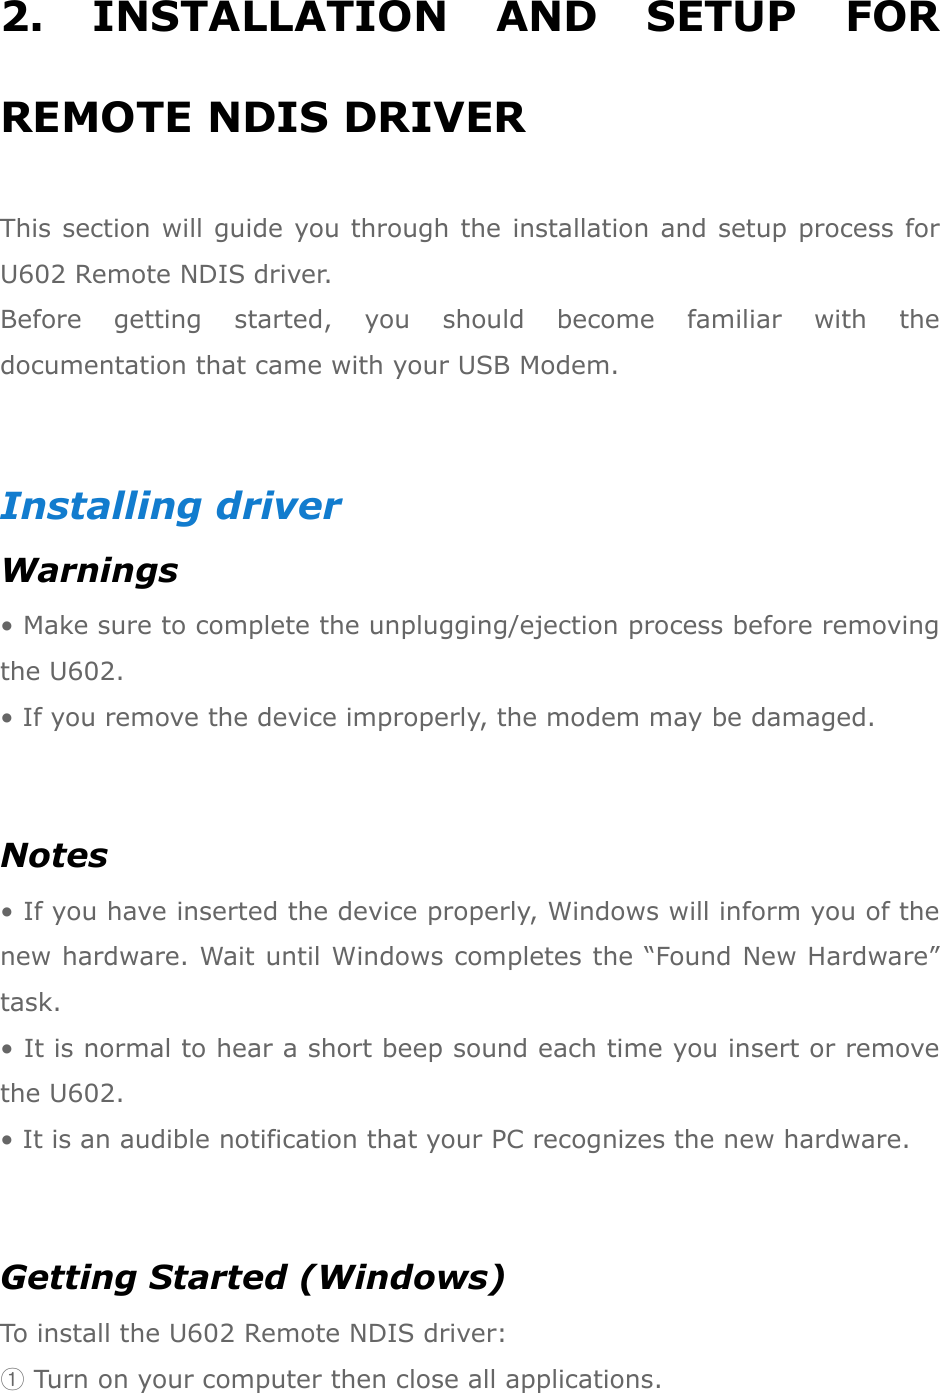 2.  INSTALLATION  AND  SETUP  FOR REMOTE NDIS DRIVER This section will guide you through the installation and setup process for U602 Remote NDIS driver.   Before  getting  started,  you  should  become  familiar  with  the documentation that came with your USB Modem.  Installing driver Warnings • Make sure to complete the unplugging/ejection process before removing the U602.   • If you remove the device improperly, the modem may be damaged.  Notes • If you have inserted the device properly, Windows will inform you of the new hardware. Wait until Windows completes the “Found New Hardware” task.   • It is normal to hear a short beep sound each time you insert or remove the U602.   • It is an audible notification that your PC recognizes the new hardware.  Getting Started (Windows) To install the U602 Remote NDIS driver: ① Turn on your computer then close all applications. 